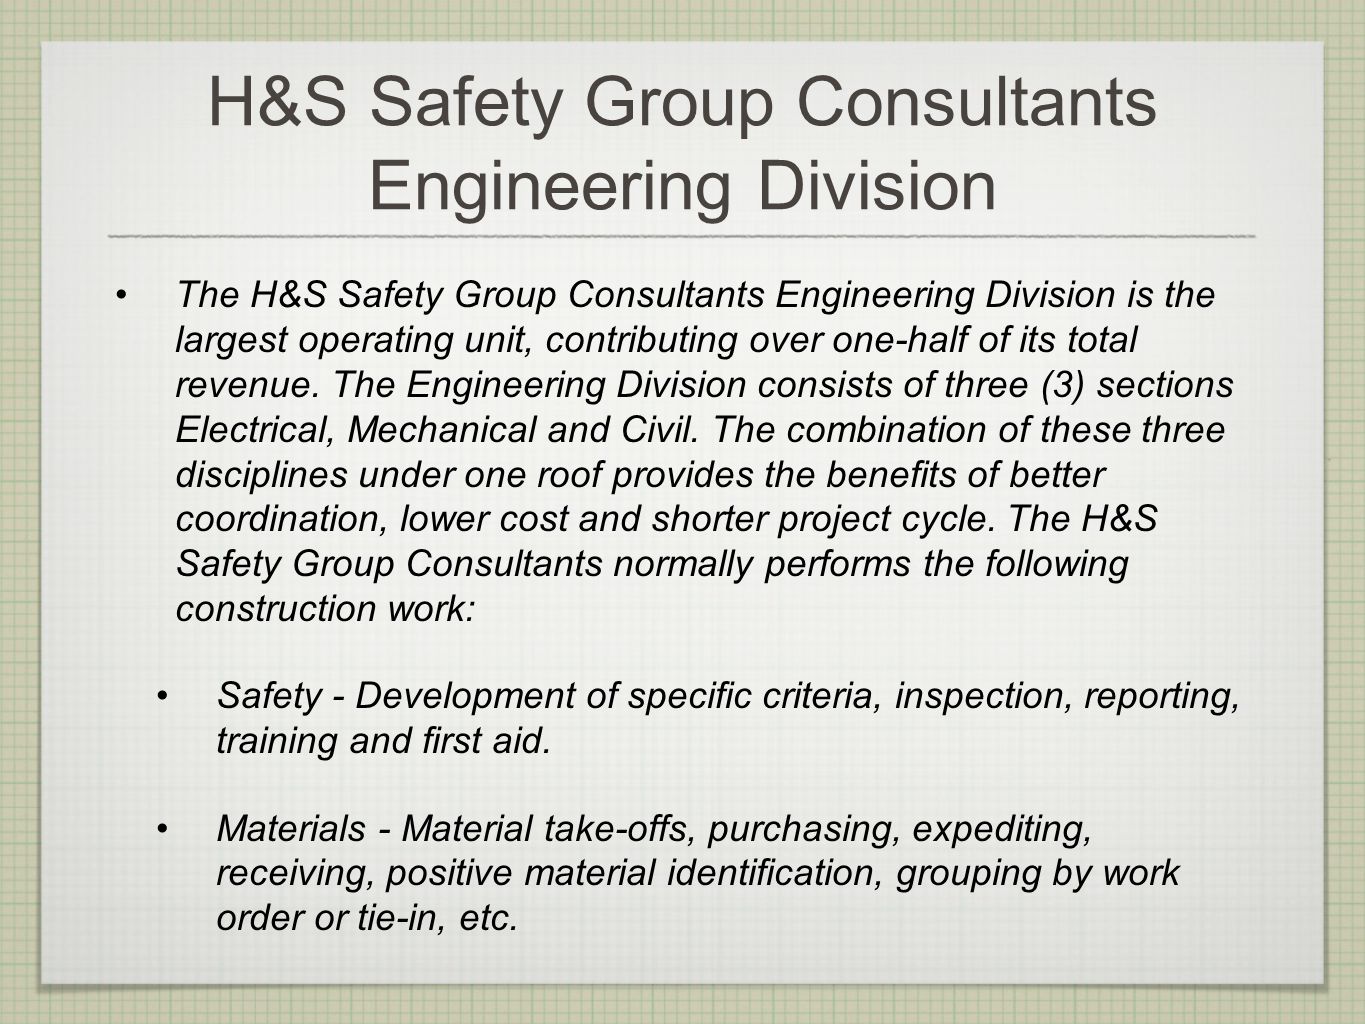 H&S Safety Group Consultants Engineering Division The H&S Safety Group Consultants Engineering Division is the largest operating unit, contributing over one-half of its total revenue.